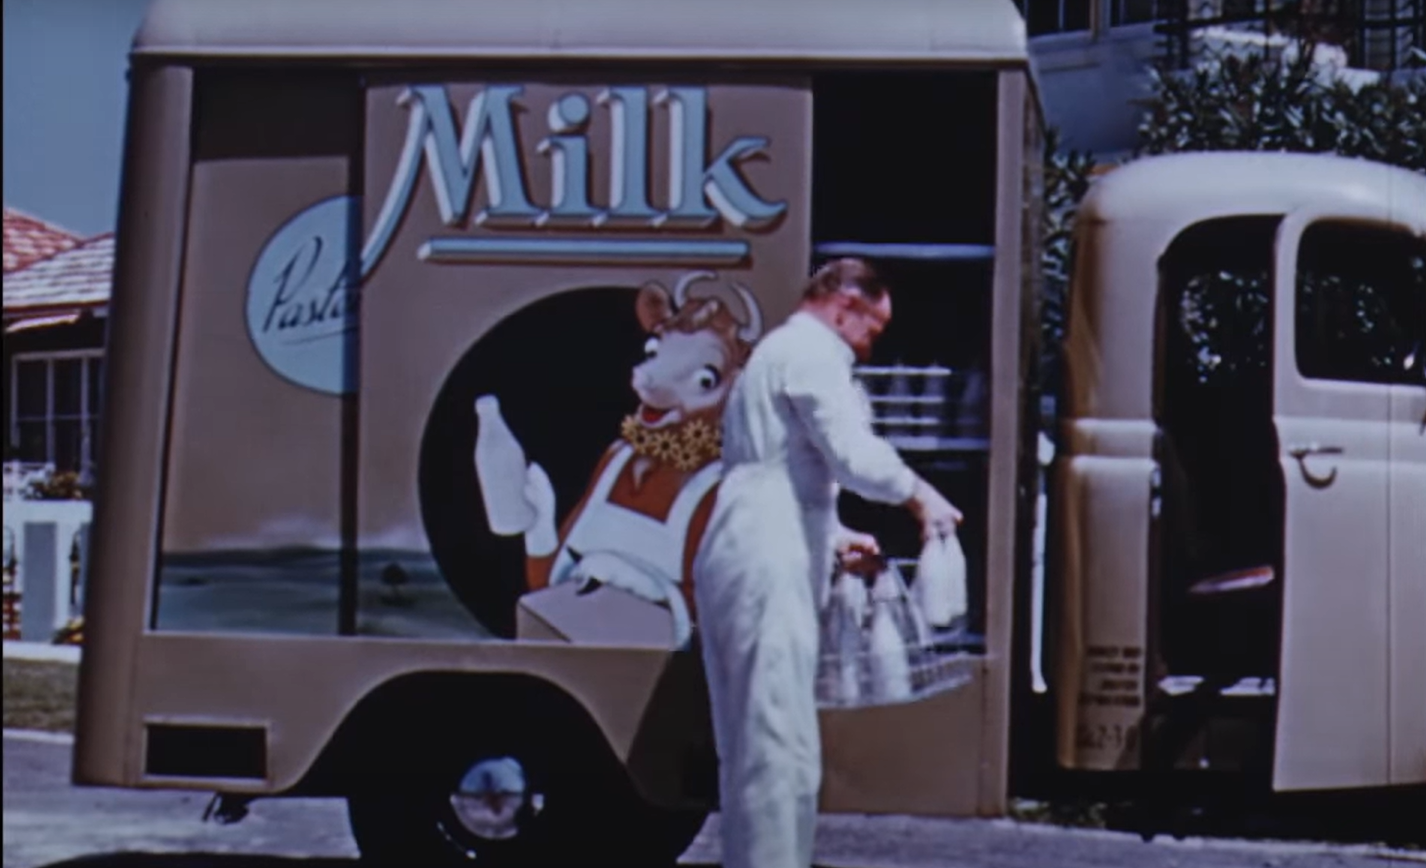 Still from Our Daily Milk